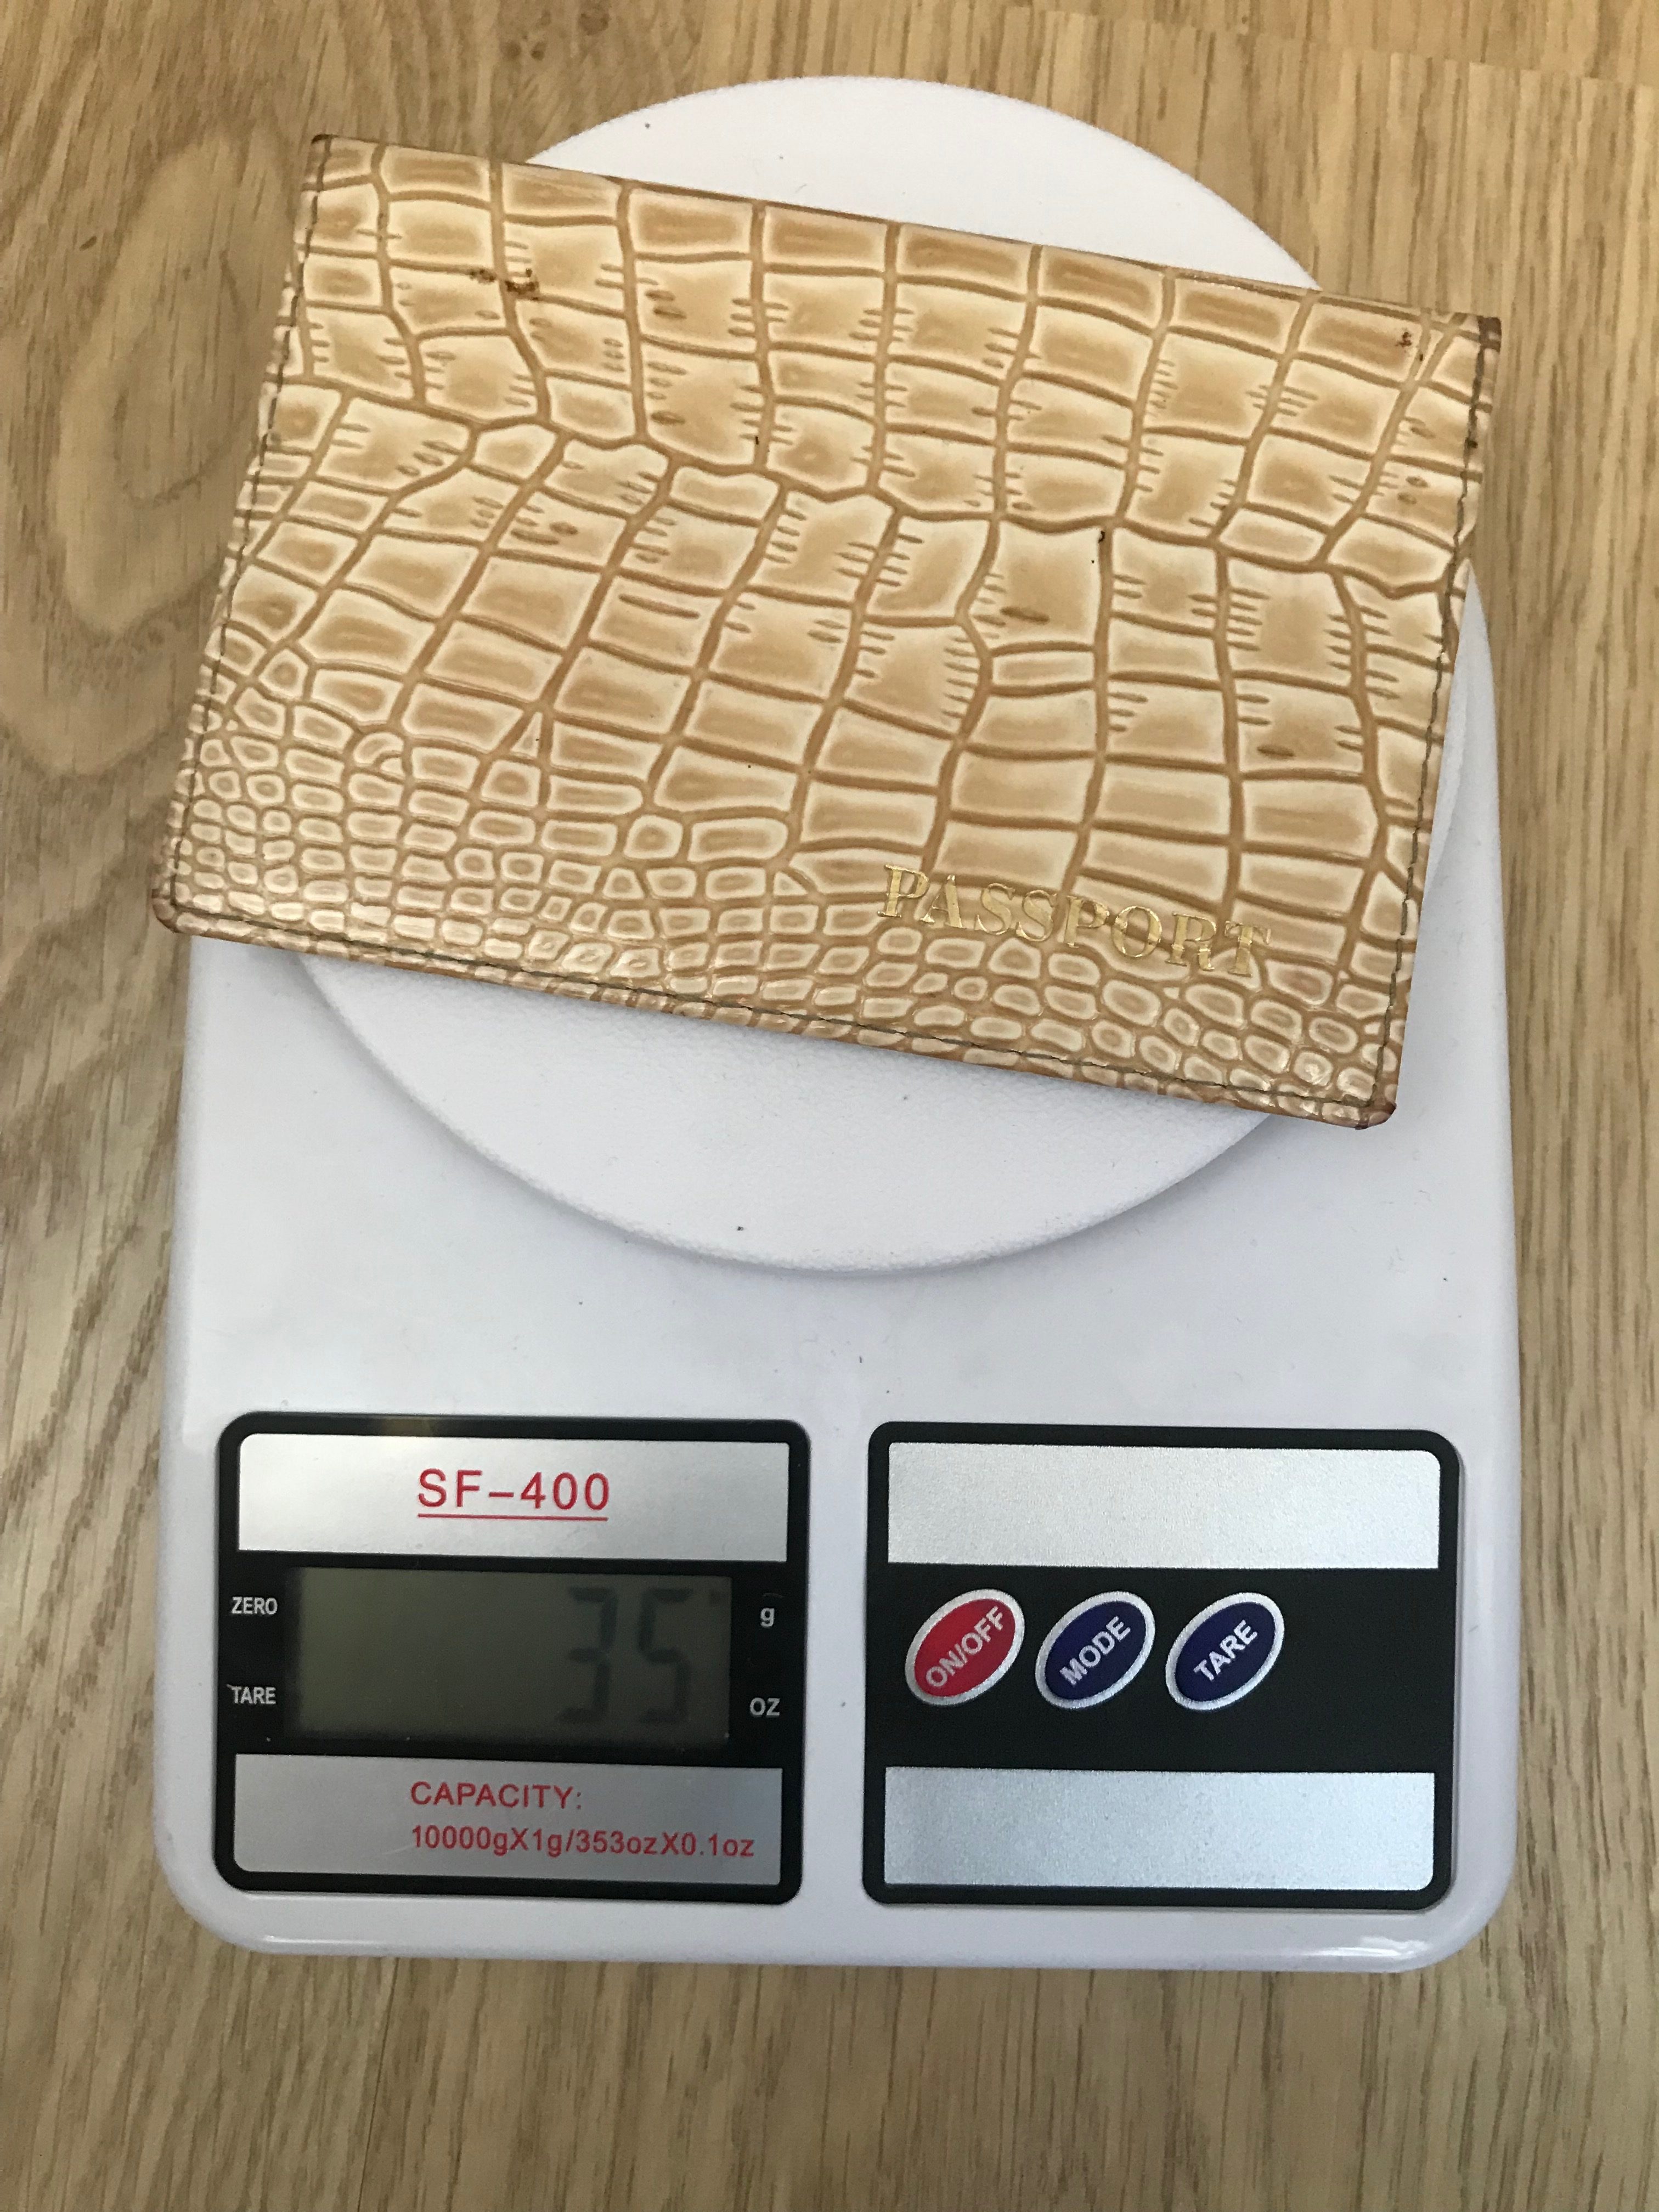 How much does a passport cover weigh?